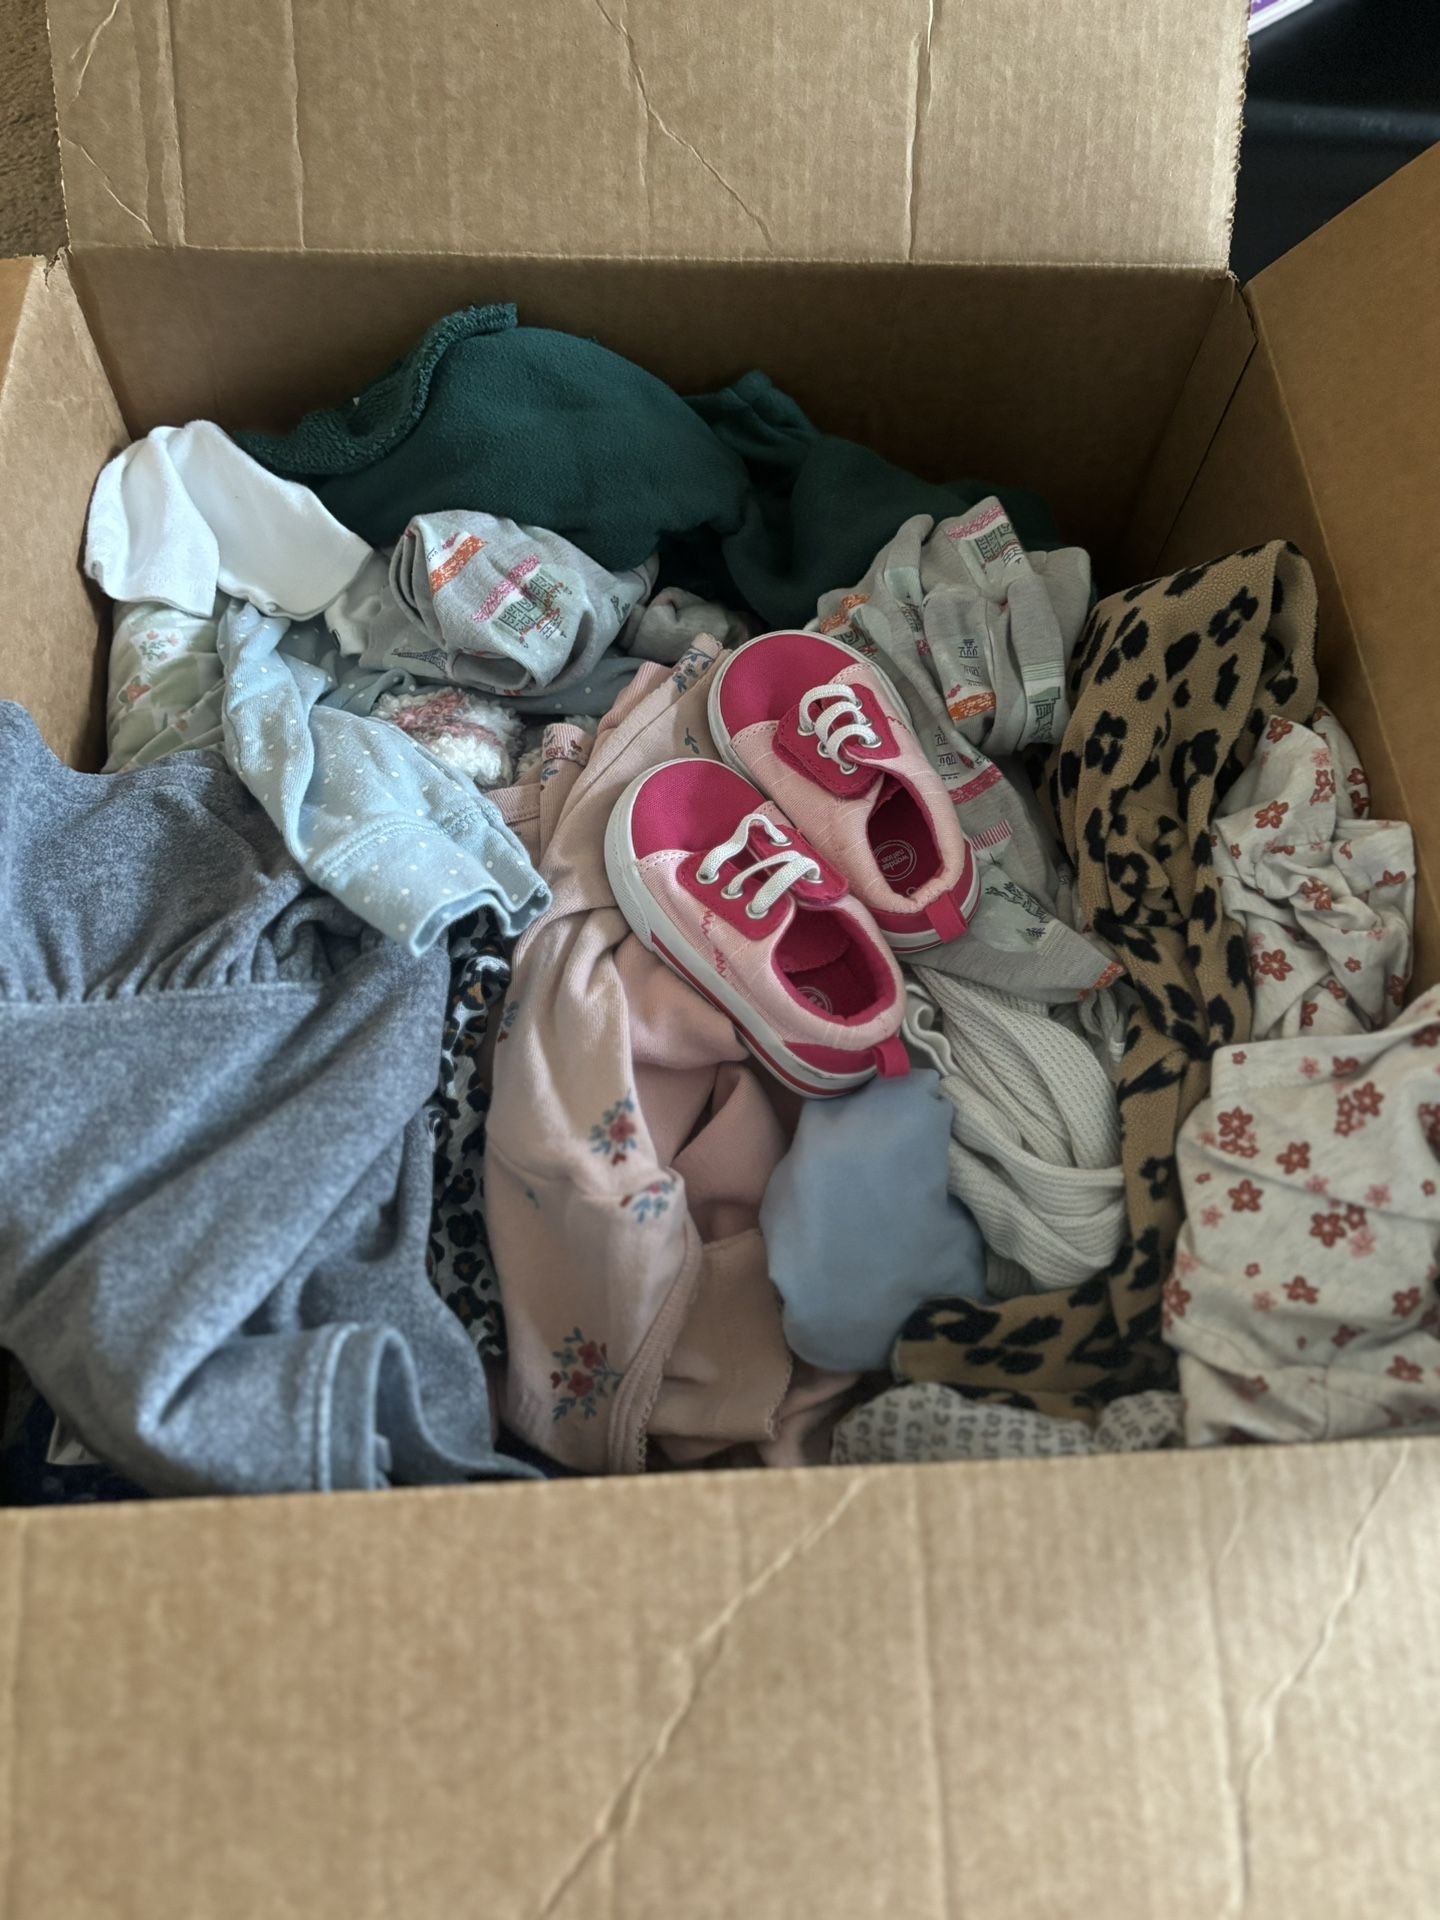 12 Month girl clothes